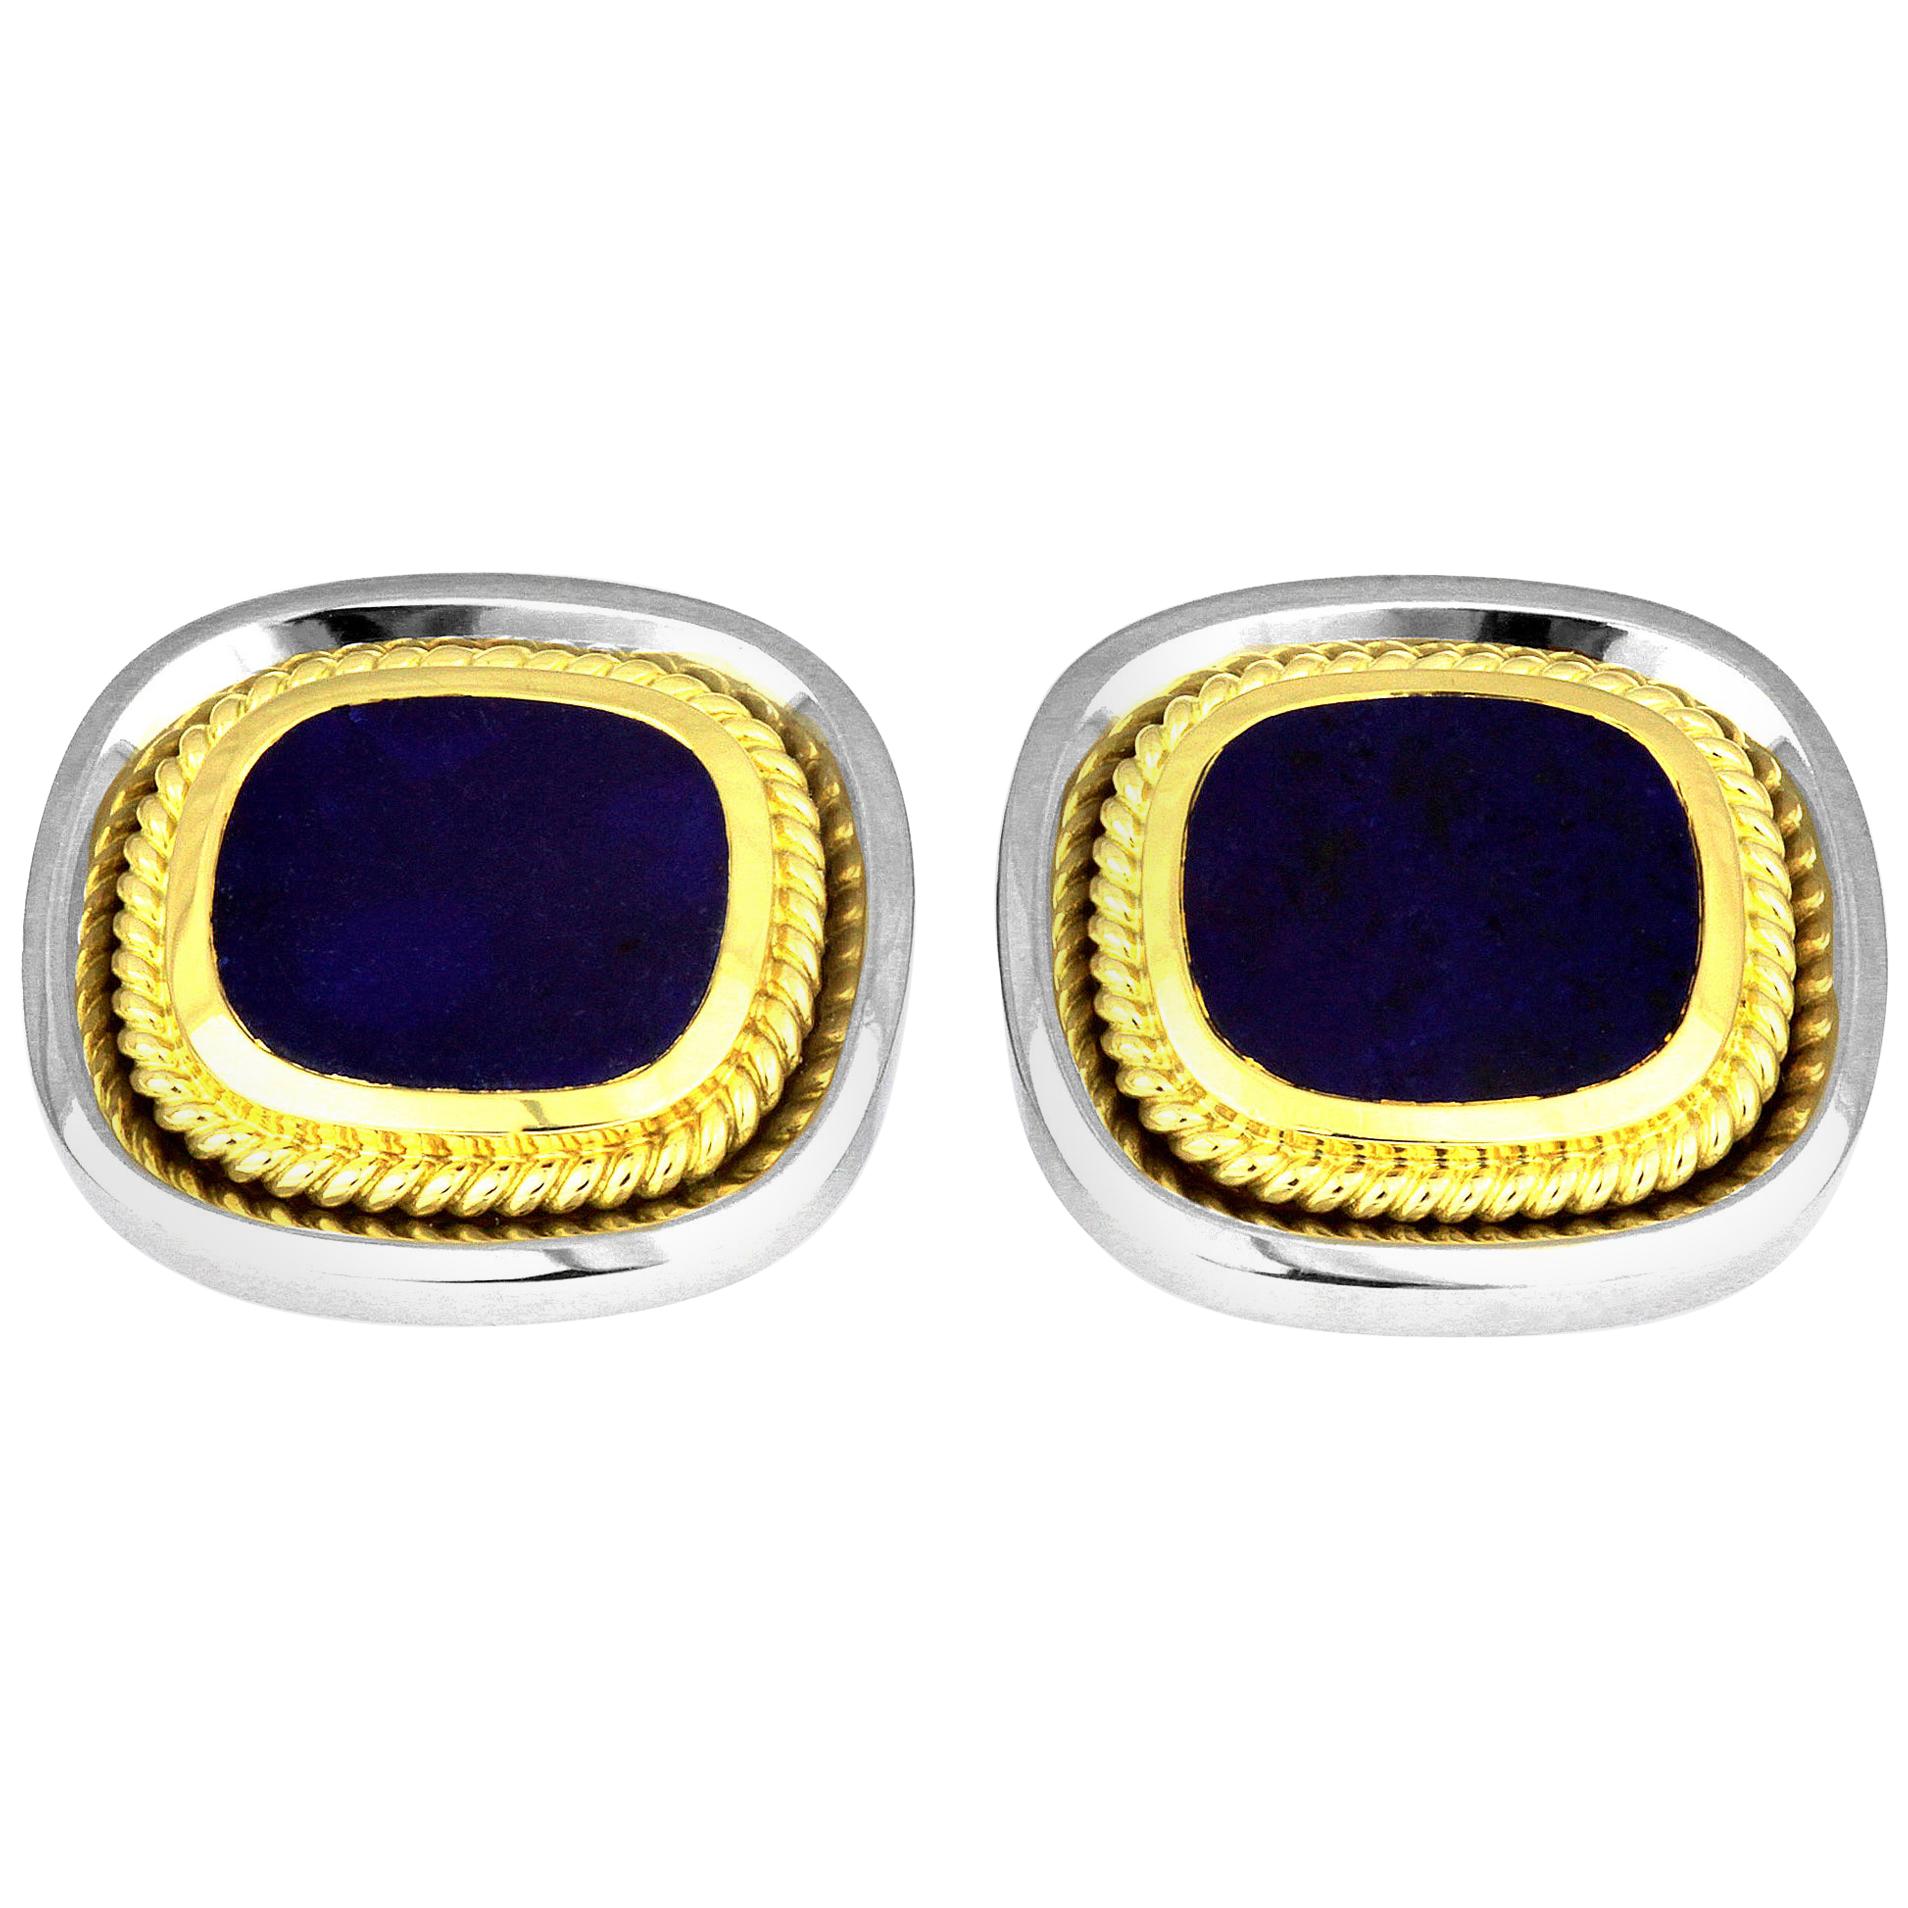 Vintage Cufflinks with Lapis Lazuli in Bimetal 18 Carat White & Yellow Gold For Sale